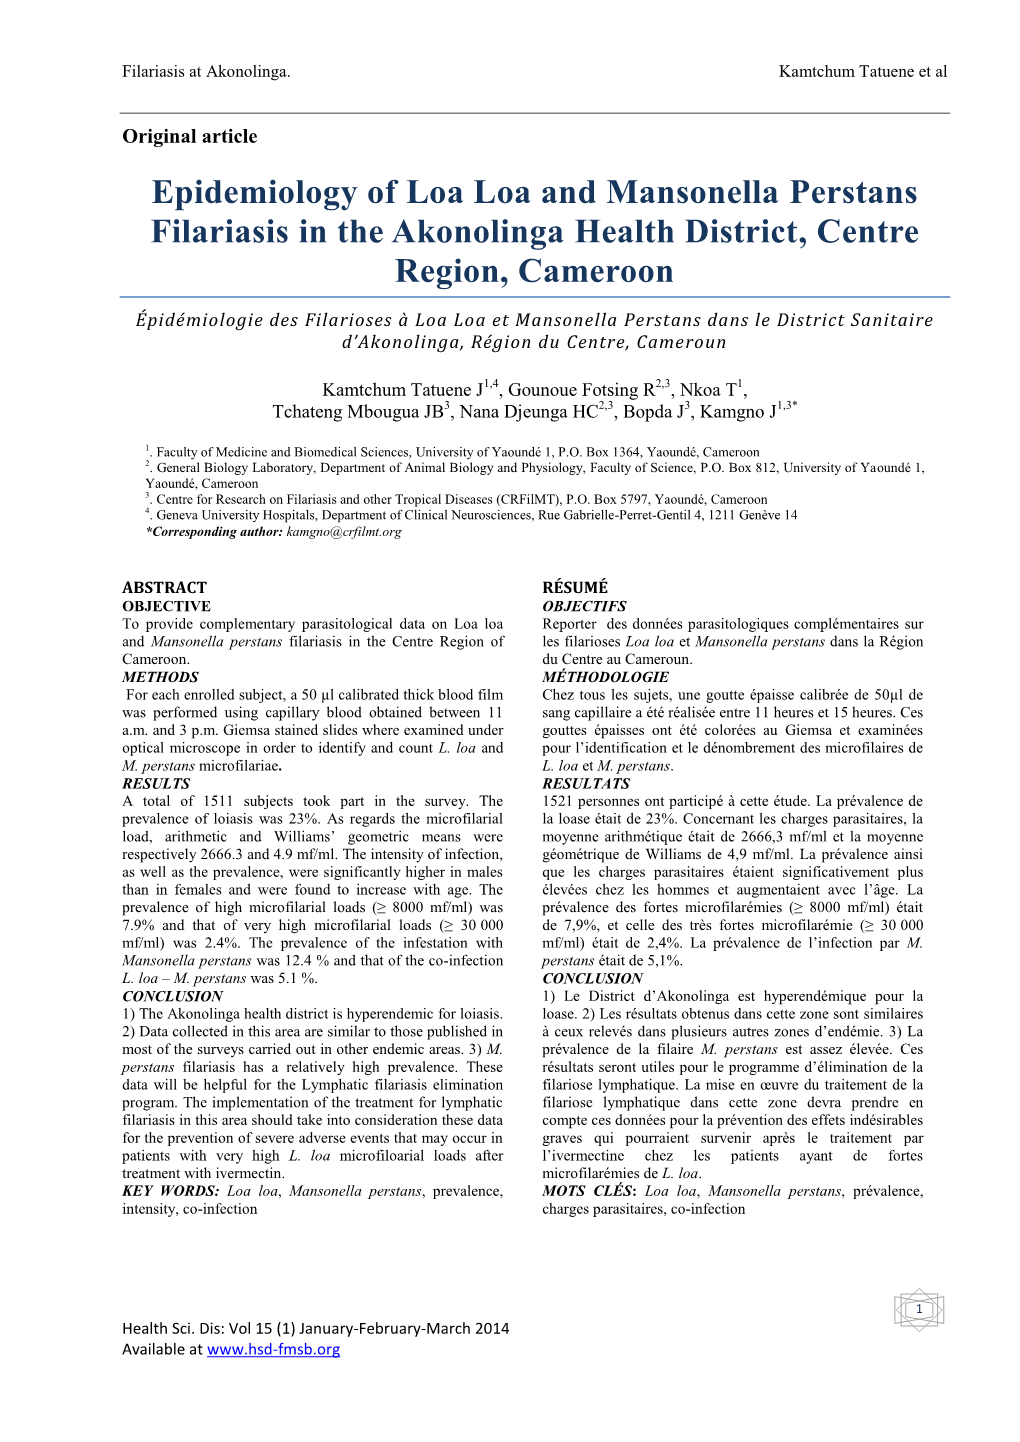 Epidemiology of Loa Loa and Mansonella Perstans Filariasis in the Akonolinga Health District, Centre Region, Cameroon